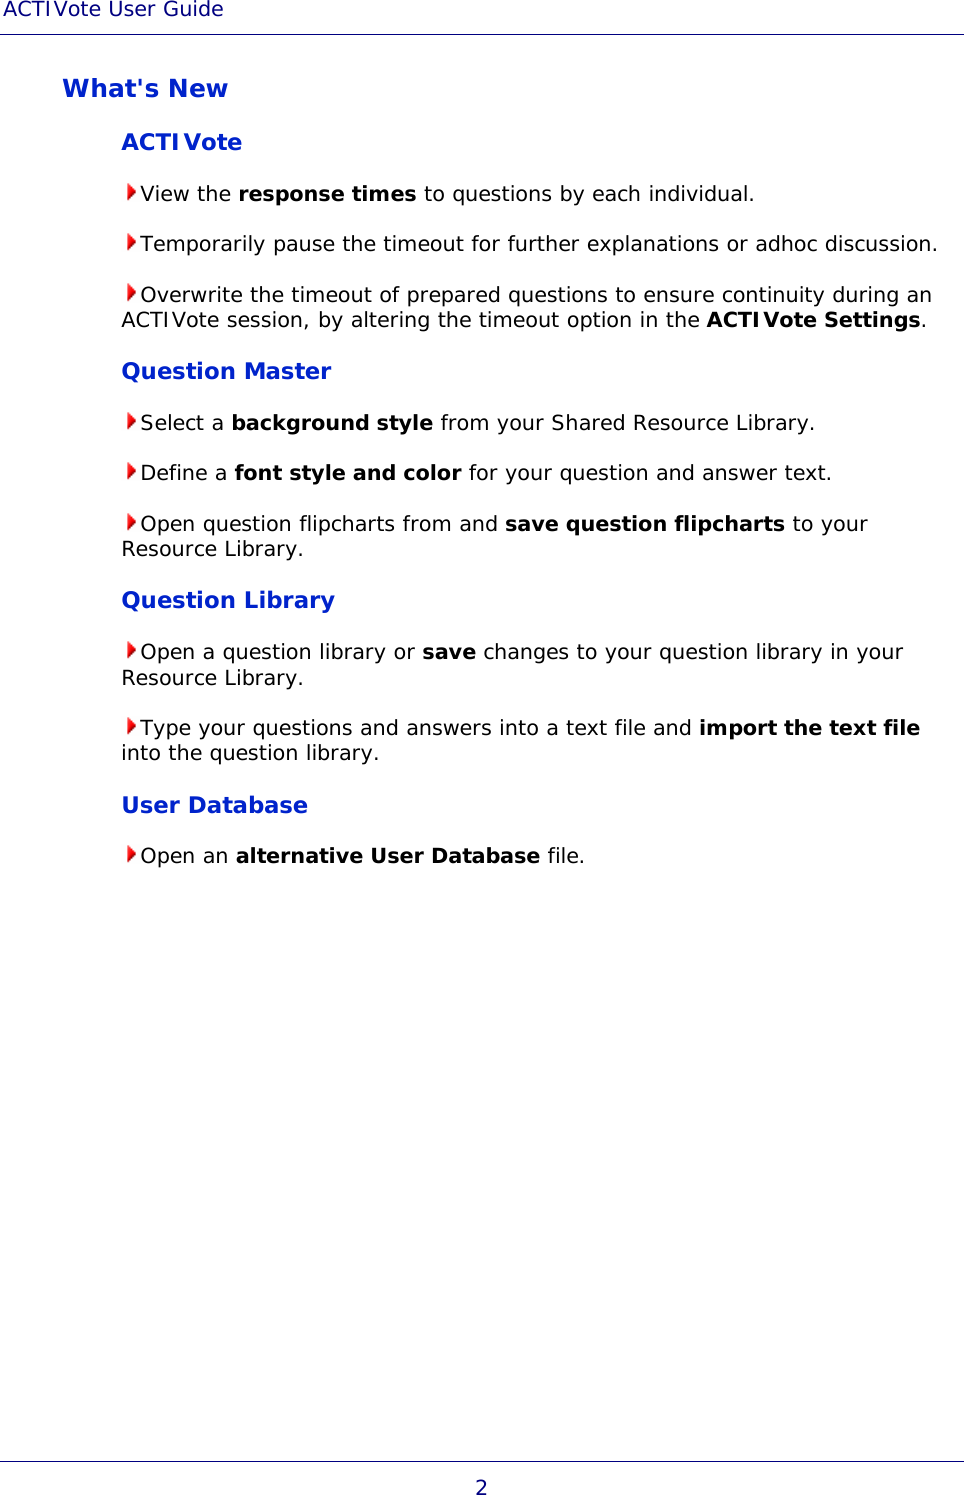 ACTIVote User Guide 2 What&apos;s New ACTIVote View the response times to questions by each individual. Temporarily pause the timeout for further explanations or adhoc discussion. Overwrite the timeout of prepared questions to ensure continuity during an ACTIVote session, by altering the timeout option in the ACTIVote Settings. Question Master Select a background style from your Shared Resource Library. Define a font style and color for your question and answer text. Open question flipcharts from and save question flipcharts to your Resource Library. Question Library Open a question library or save changes to your question library in your Resource Library. Type your questions and answers into a text file and import the text file into the question library. User Database Open an alternative User Database file. 